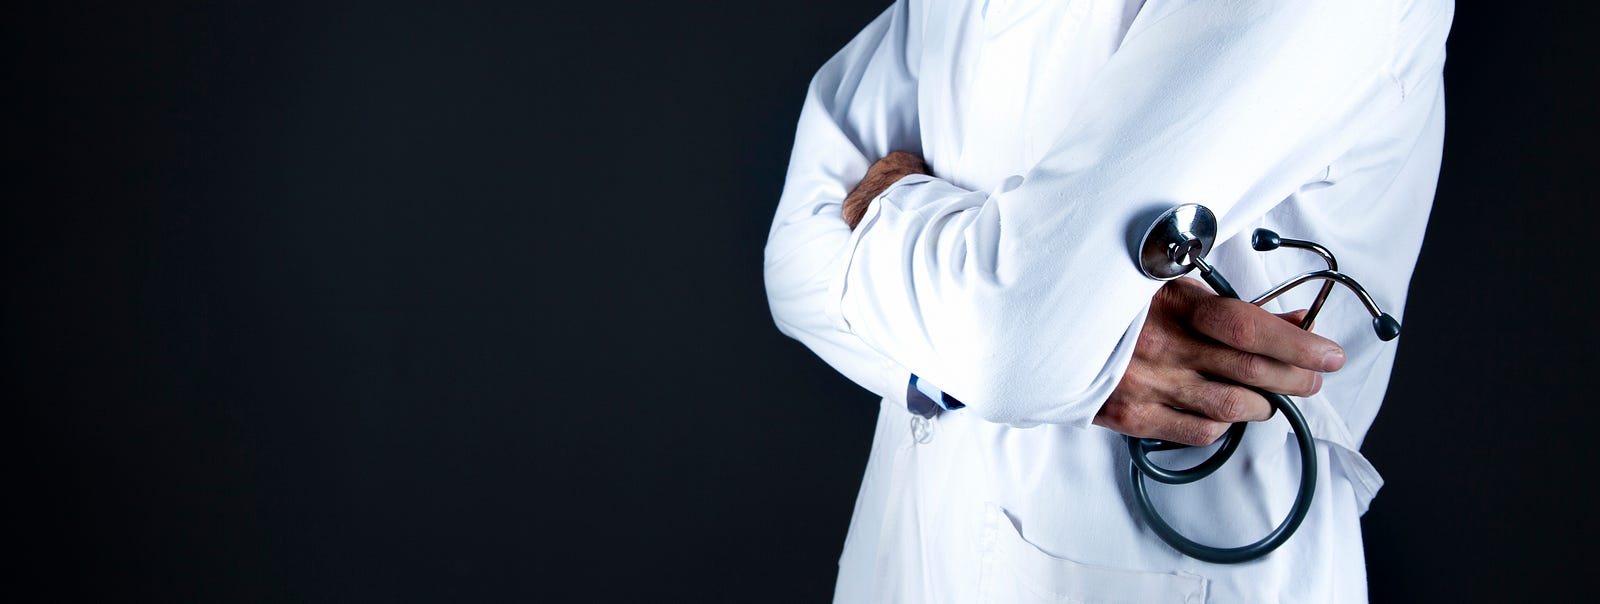 We see a doctor (from waist to upper chest) in profile at the right of the image, wearing a white coat with arms crossed. The right hand holds a stethoscope. According to the manufacturer, the most common side effects of Veozah include abdominal pain (4.3 percent versus 2.1 percent for placebo), diarrhea (3.9 versus 2.6 percent), insomnia (3.9 versus 1.8 percent), and back pain (3 versus 2.1 percent).